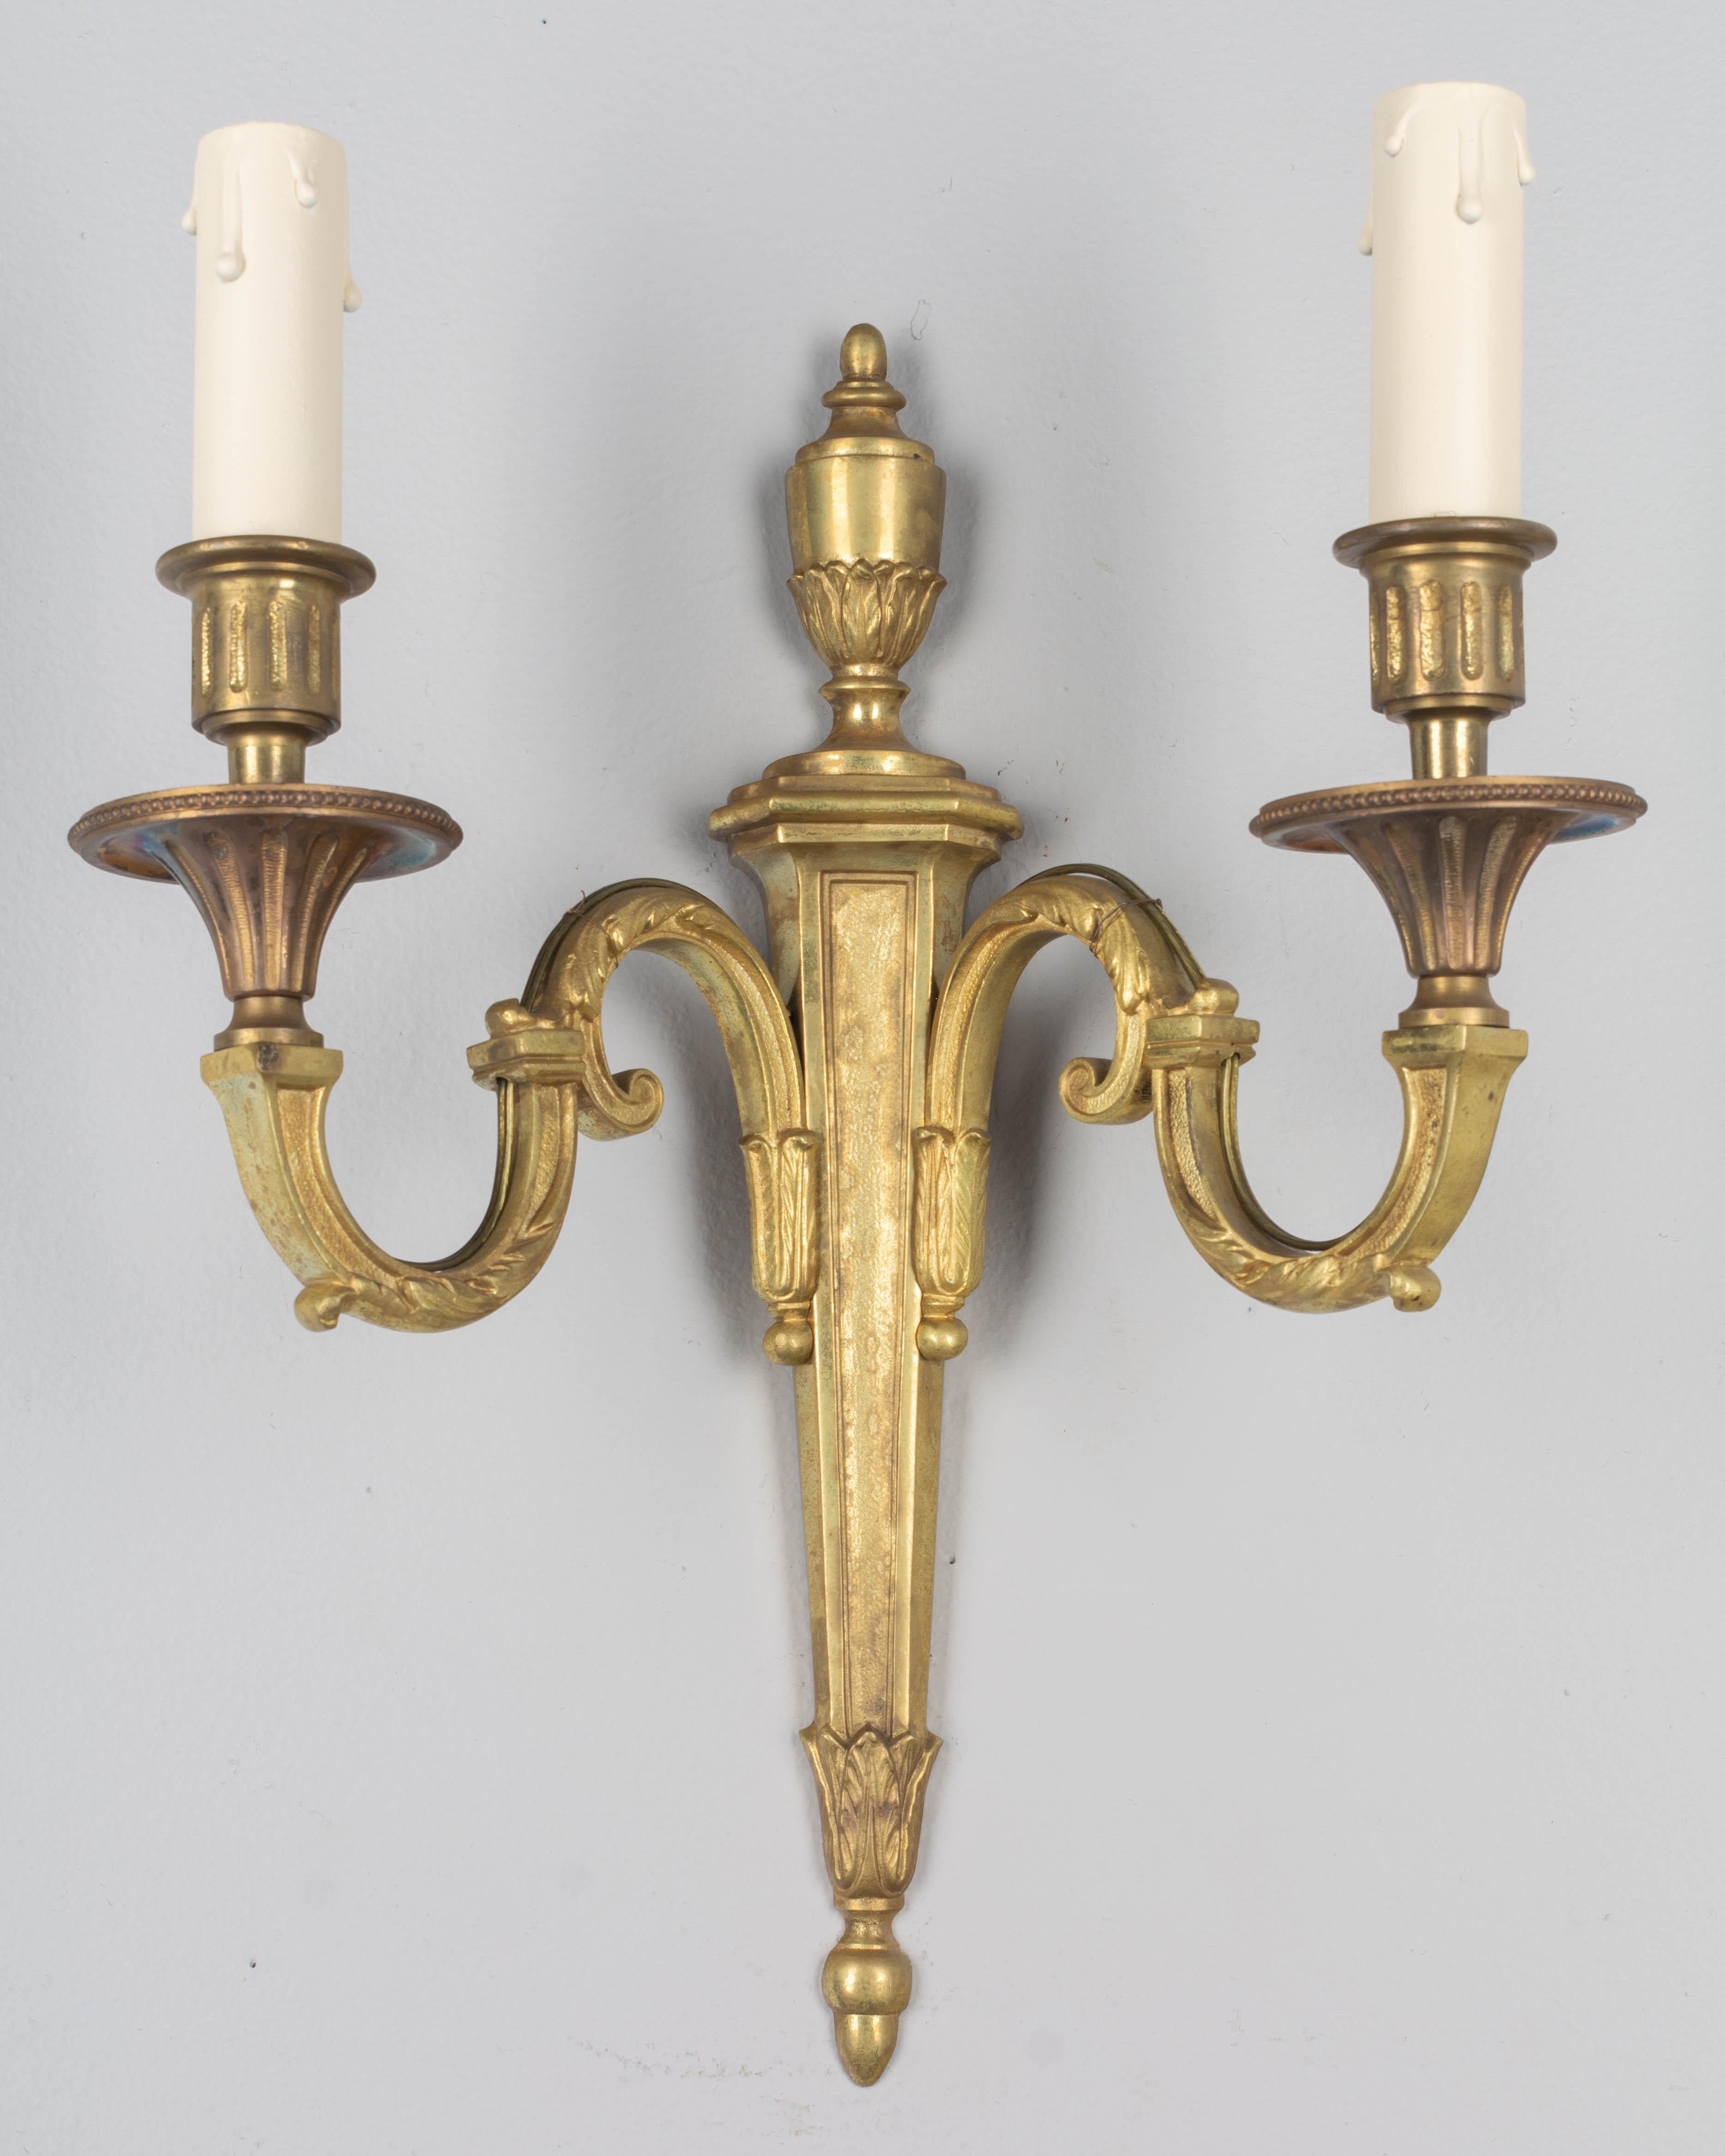 A set of four Louis XVI style French two-light bronze sconces with gold patina. Rewired with European sockets.